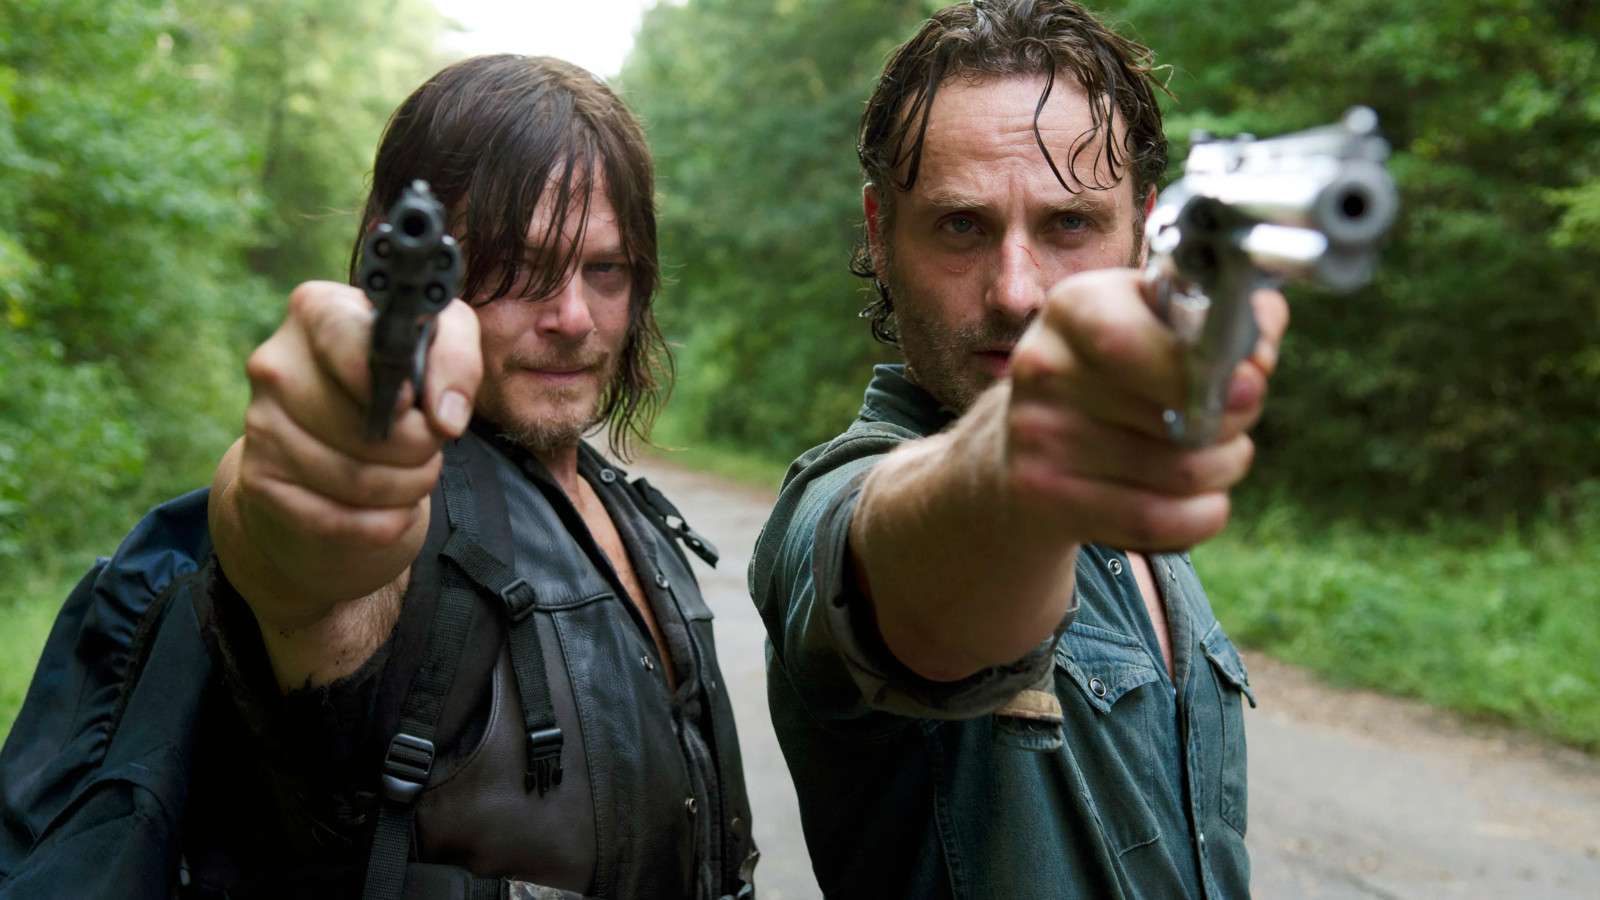 Norman Reedus as Daryl and Andrew Lincoln as Rick in The Walking Dead